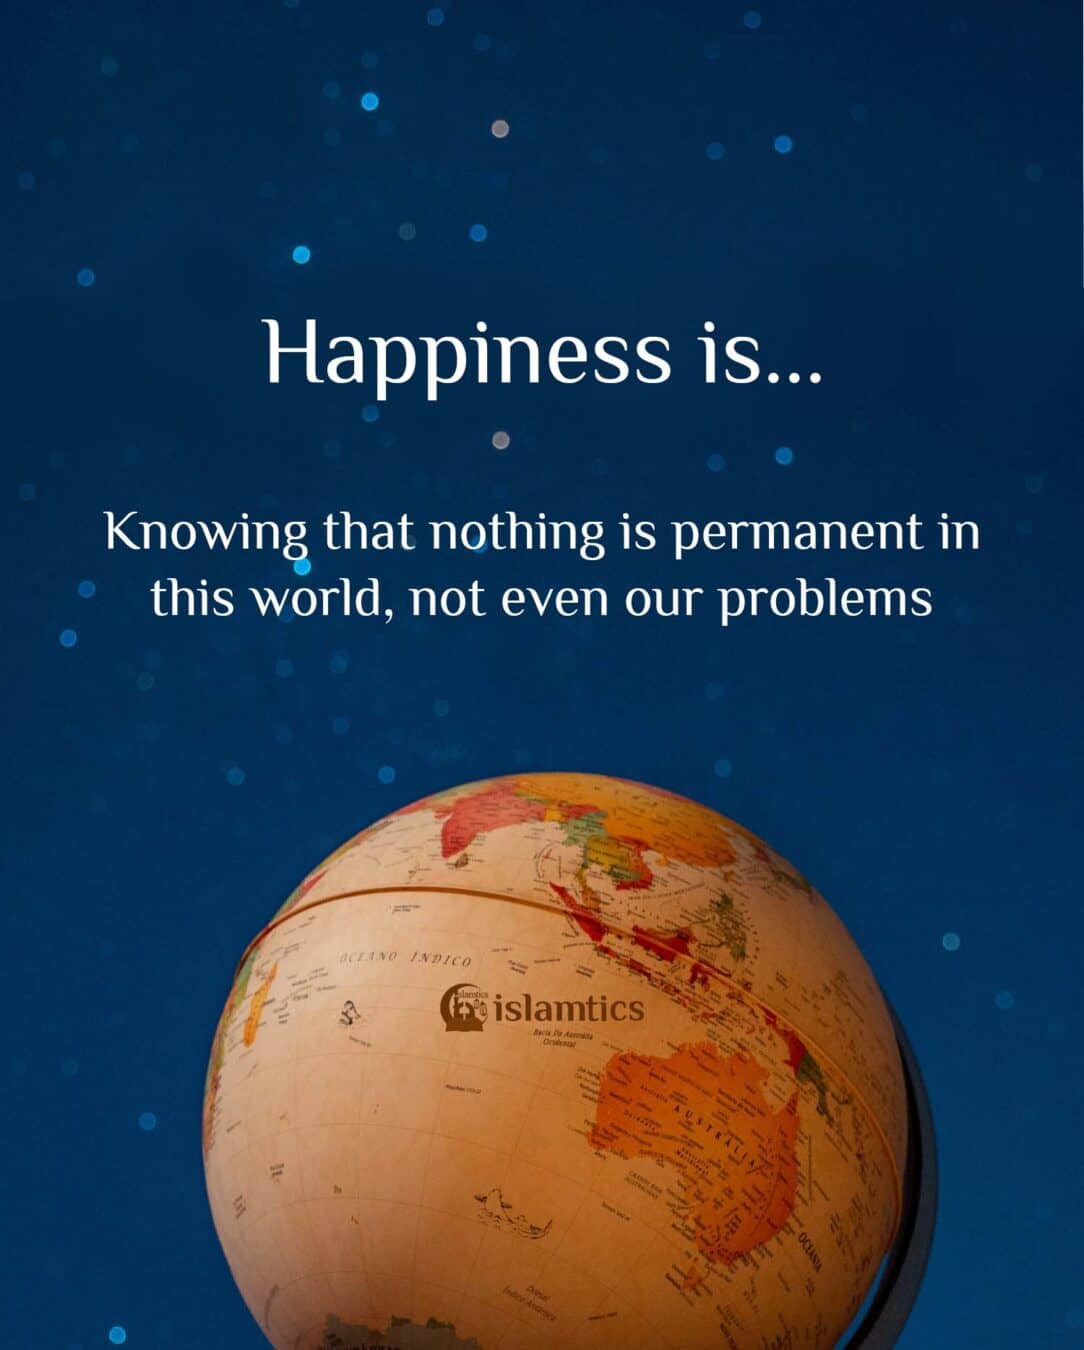 Happiness is Knowing that nothing is permanent in this world, not even our problems